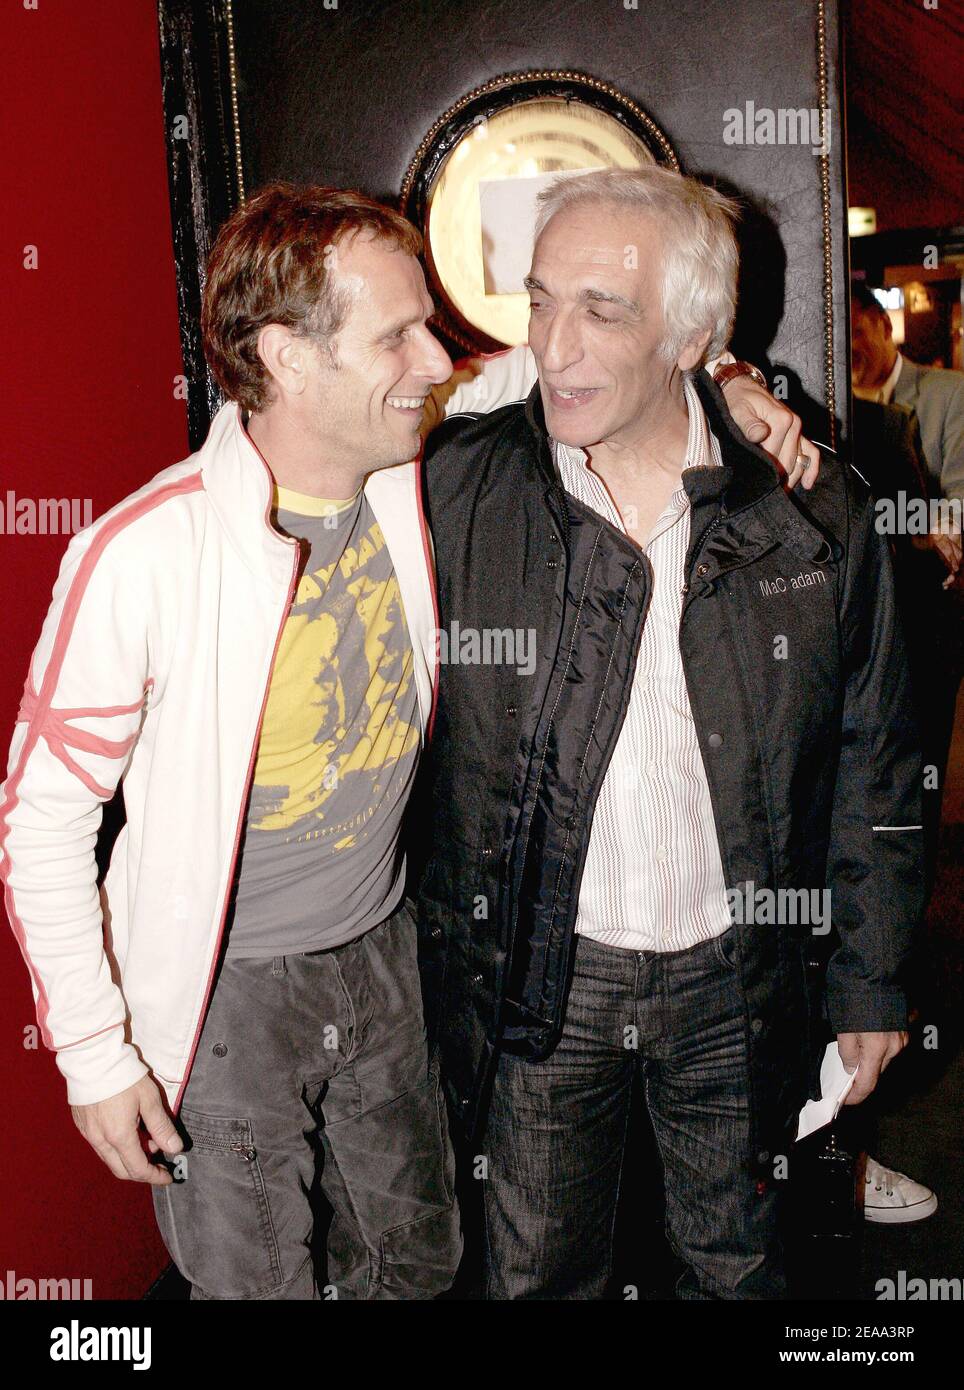 French actors Charles Berling and Gerard Darmon attend the premiere of the play 'Pour ceux qui restent' written by Pascal Elbe and directed by Charles Berling at 'La Gaite Montparnasse' in Paris on October 14, 2005. Photo by Laurent Zabulon/ABACAPRESS.COM. Stock Photo